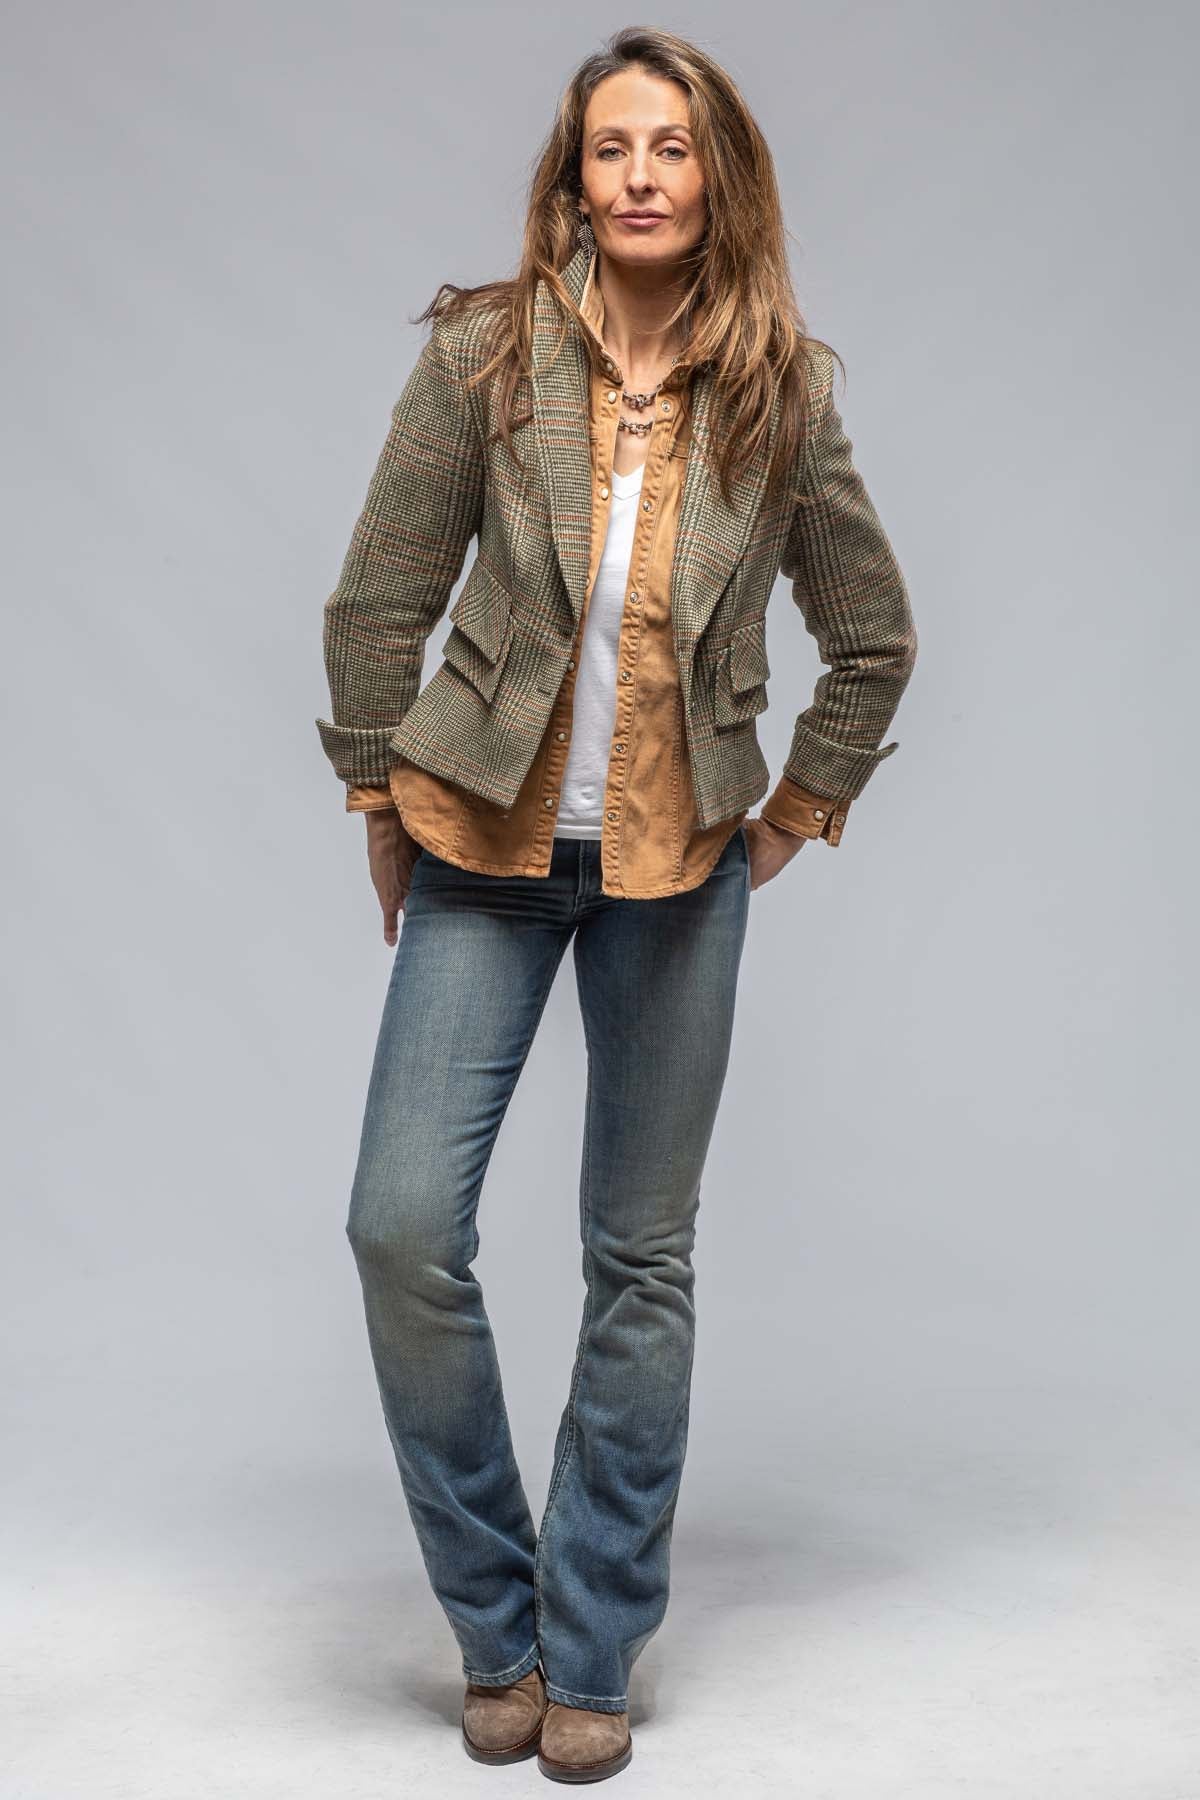 Women's Tailored Jackets Sale, Up To 70% Off | Axel's Outpost